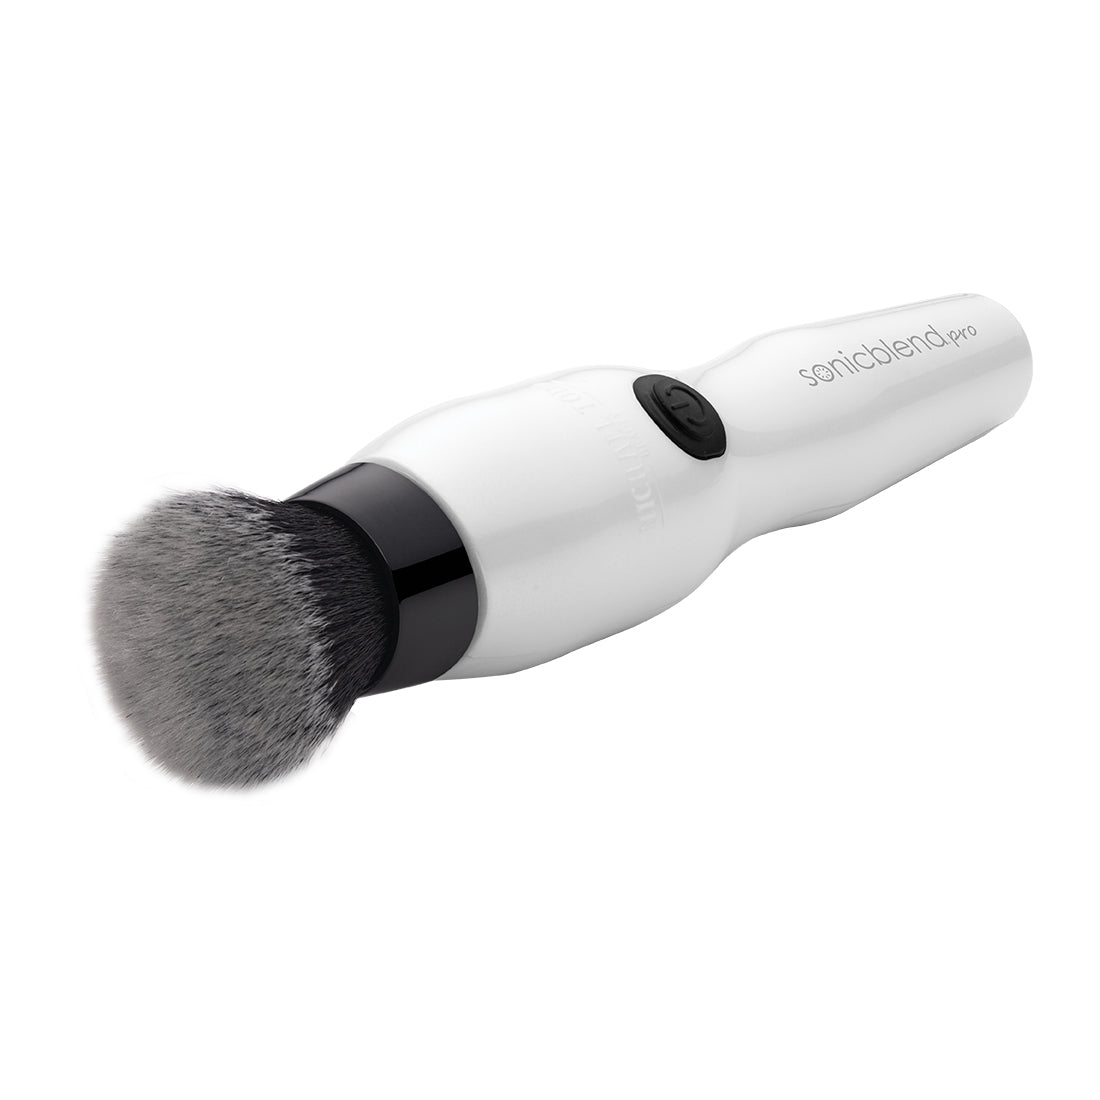 White Sonicblend Pro Sonic Makeup Application Brush